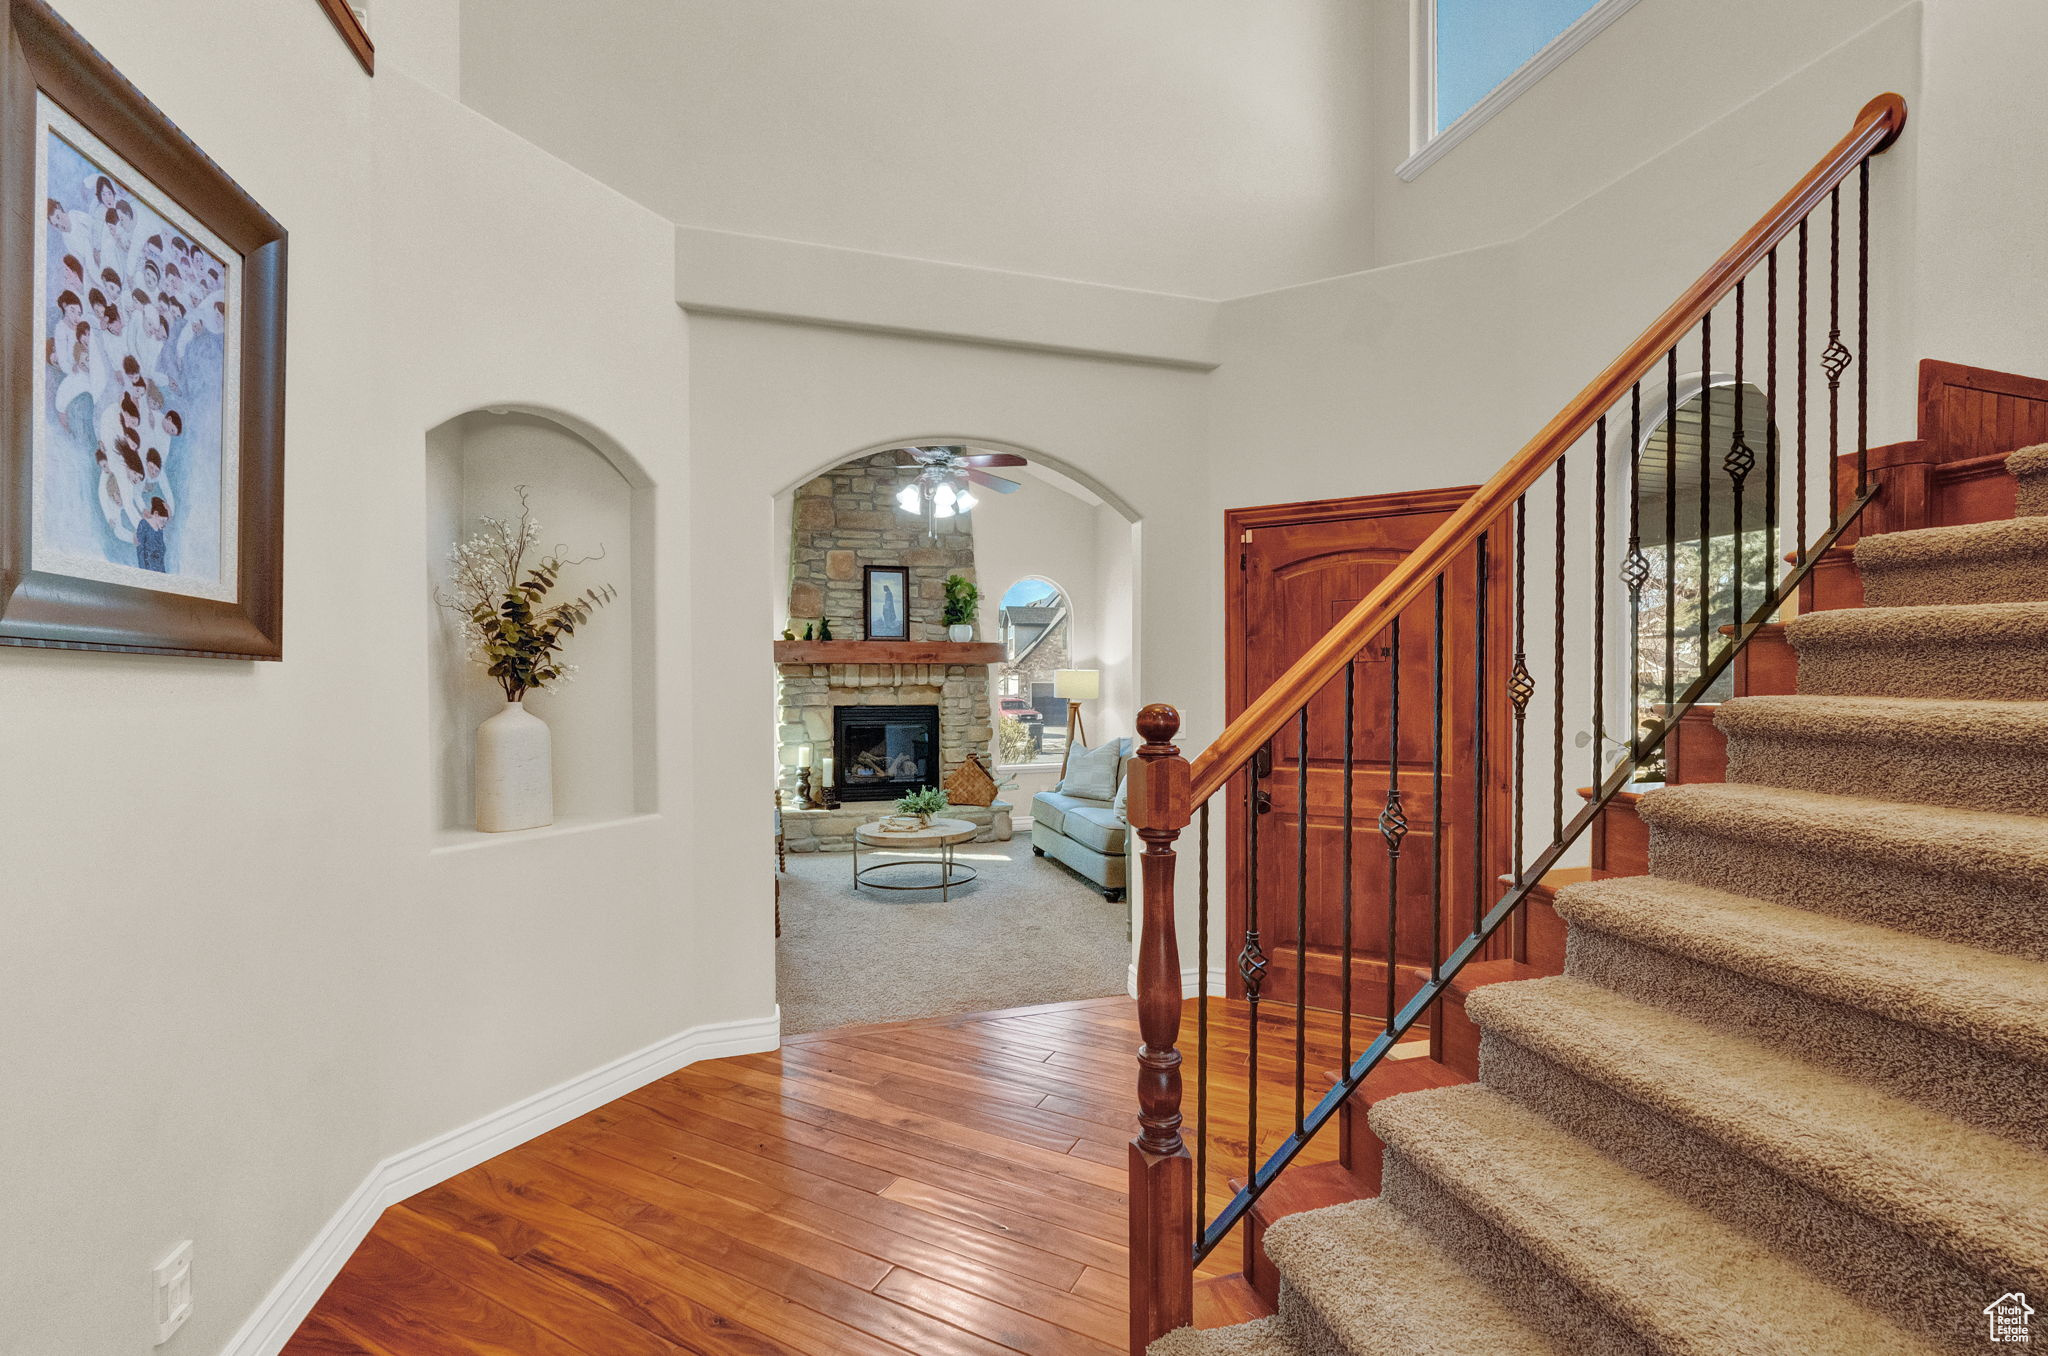 Staircase with a high ceiling, a stone fireplace, carpet flooring, and ceiling fan